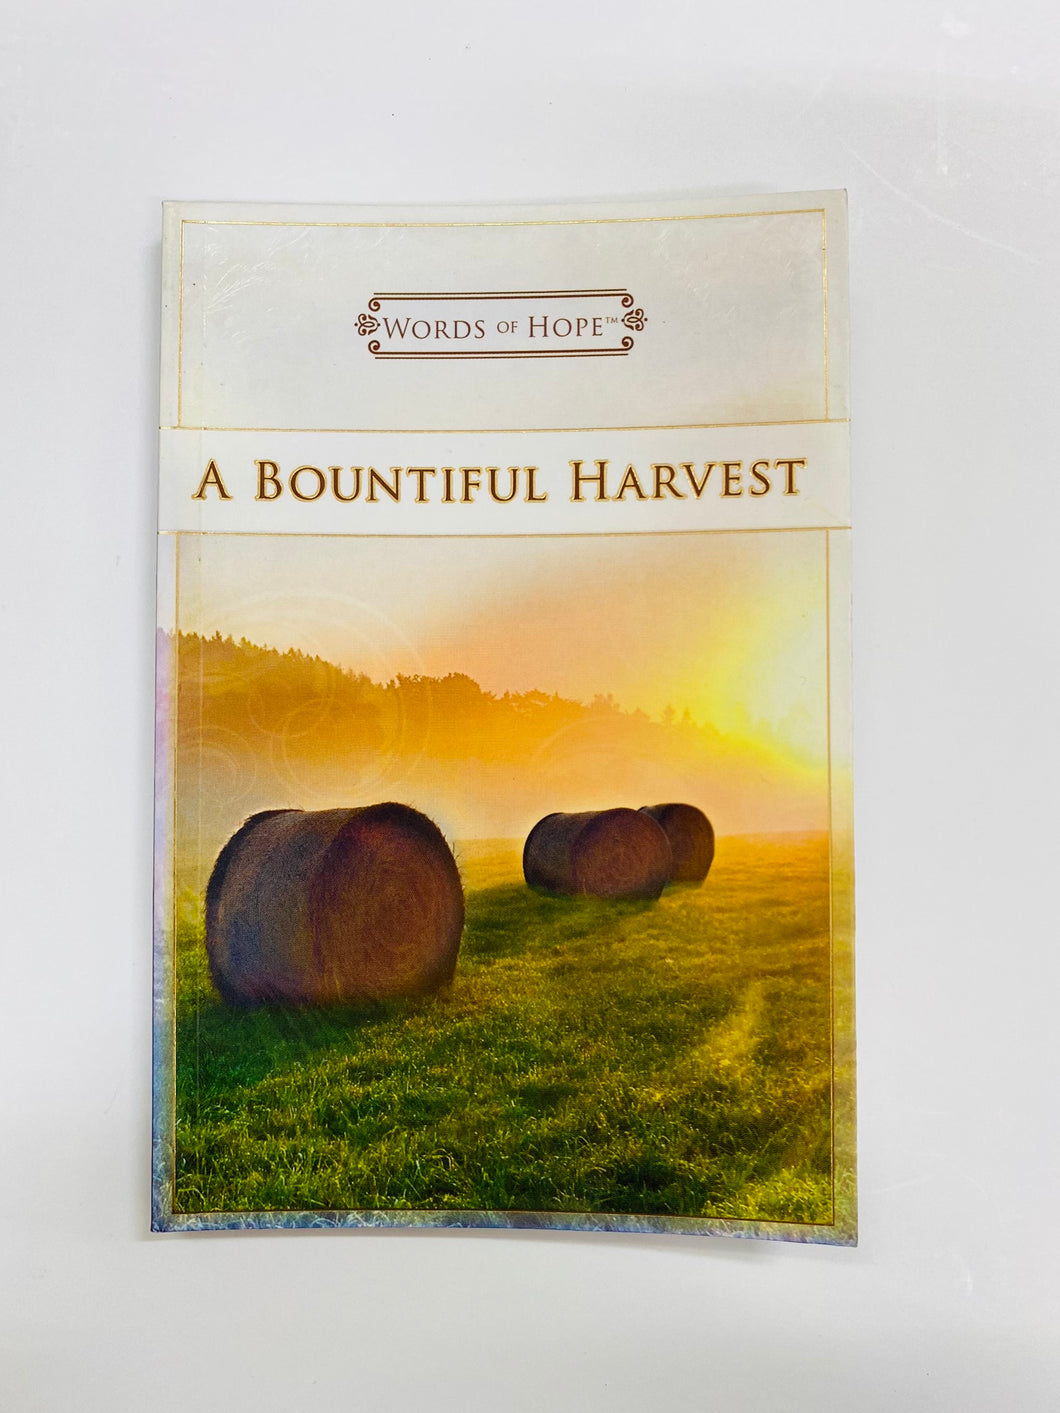 Words of Hope: A Bountiful Harvest